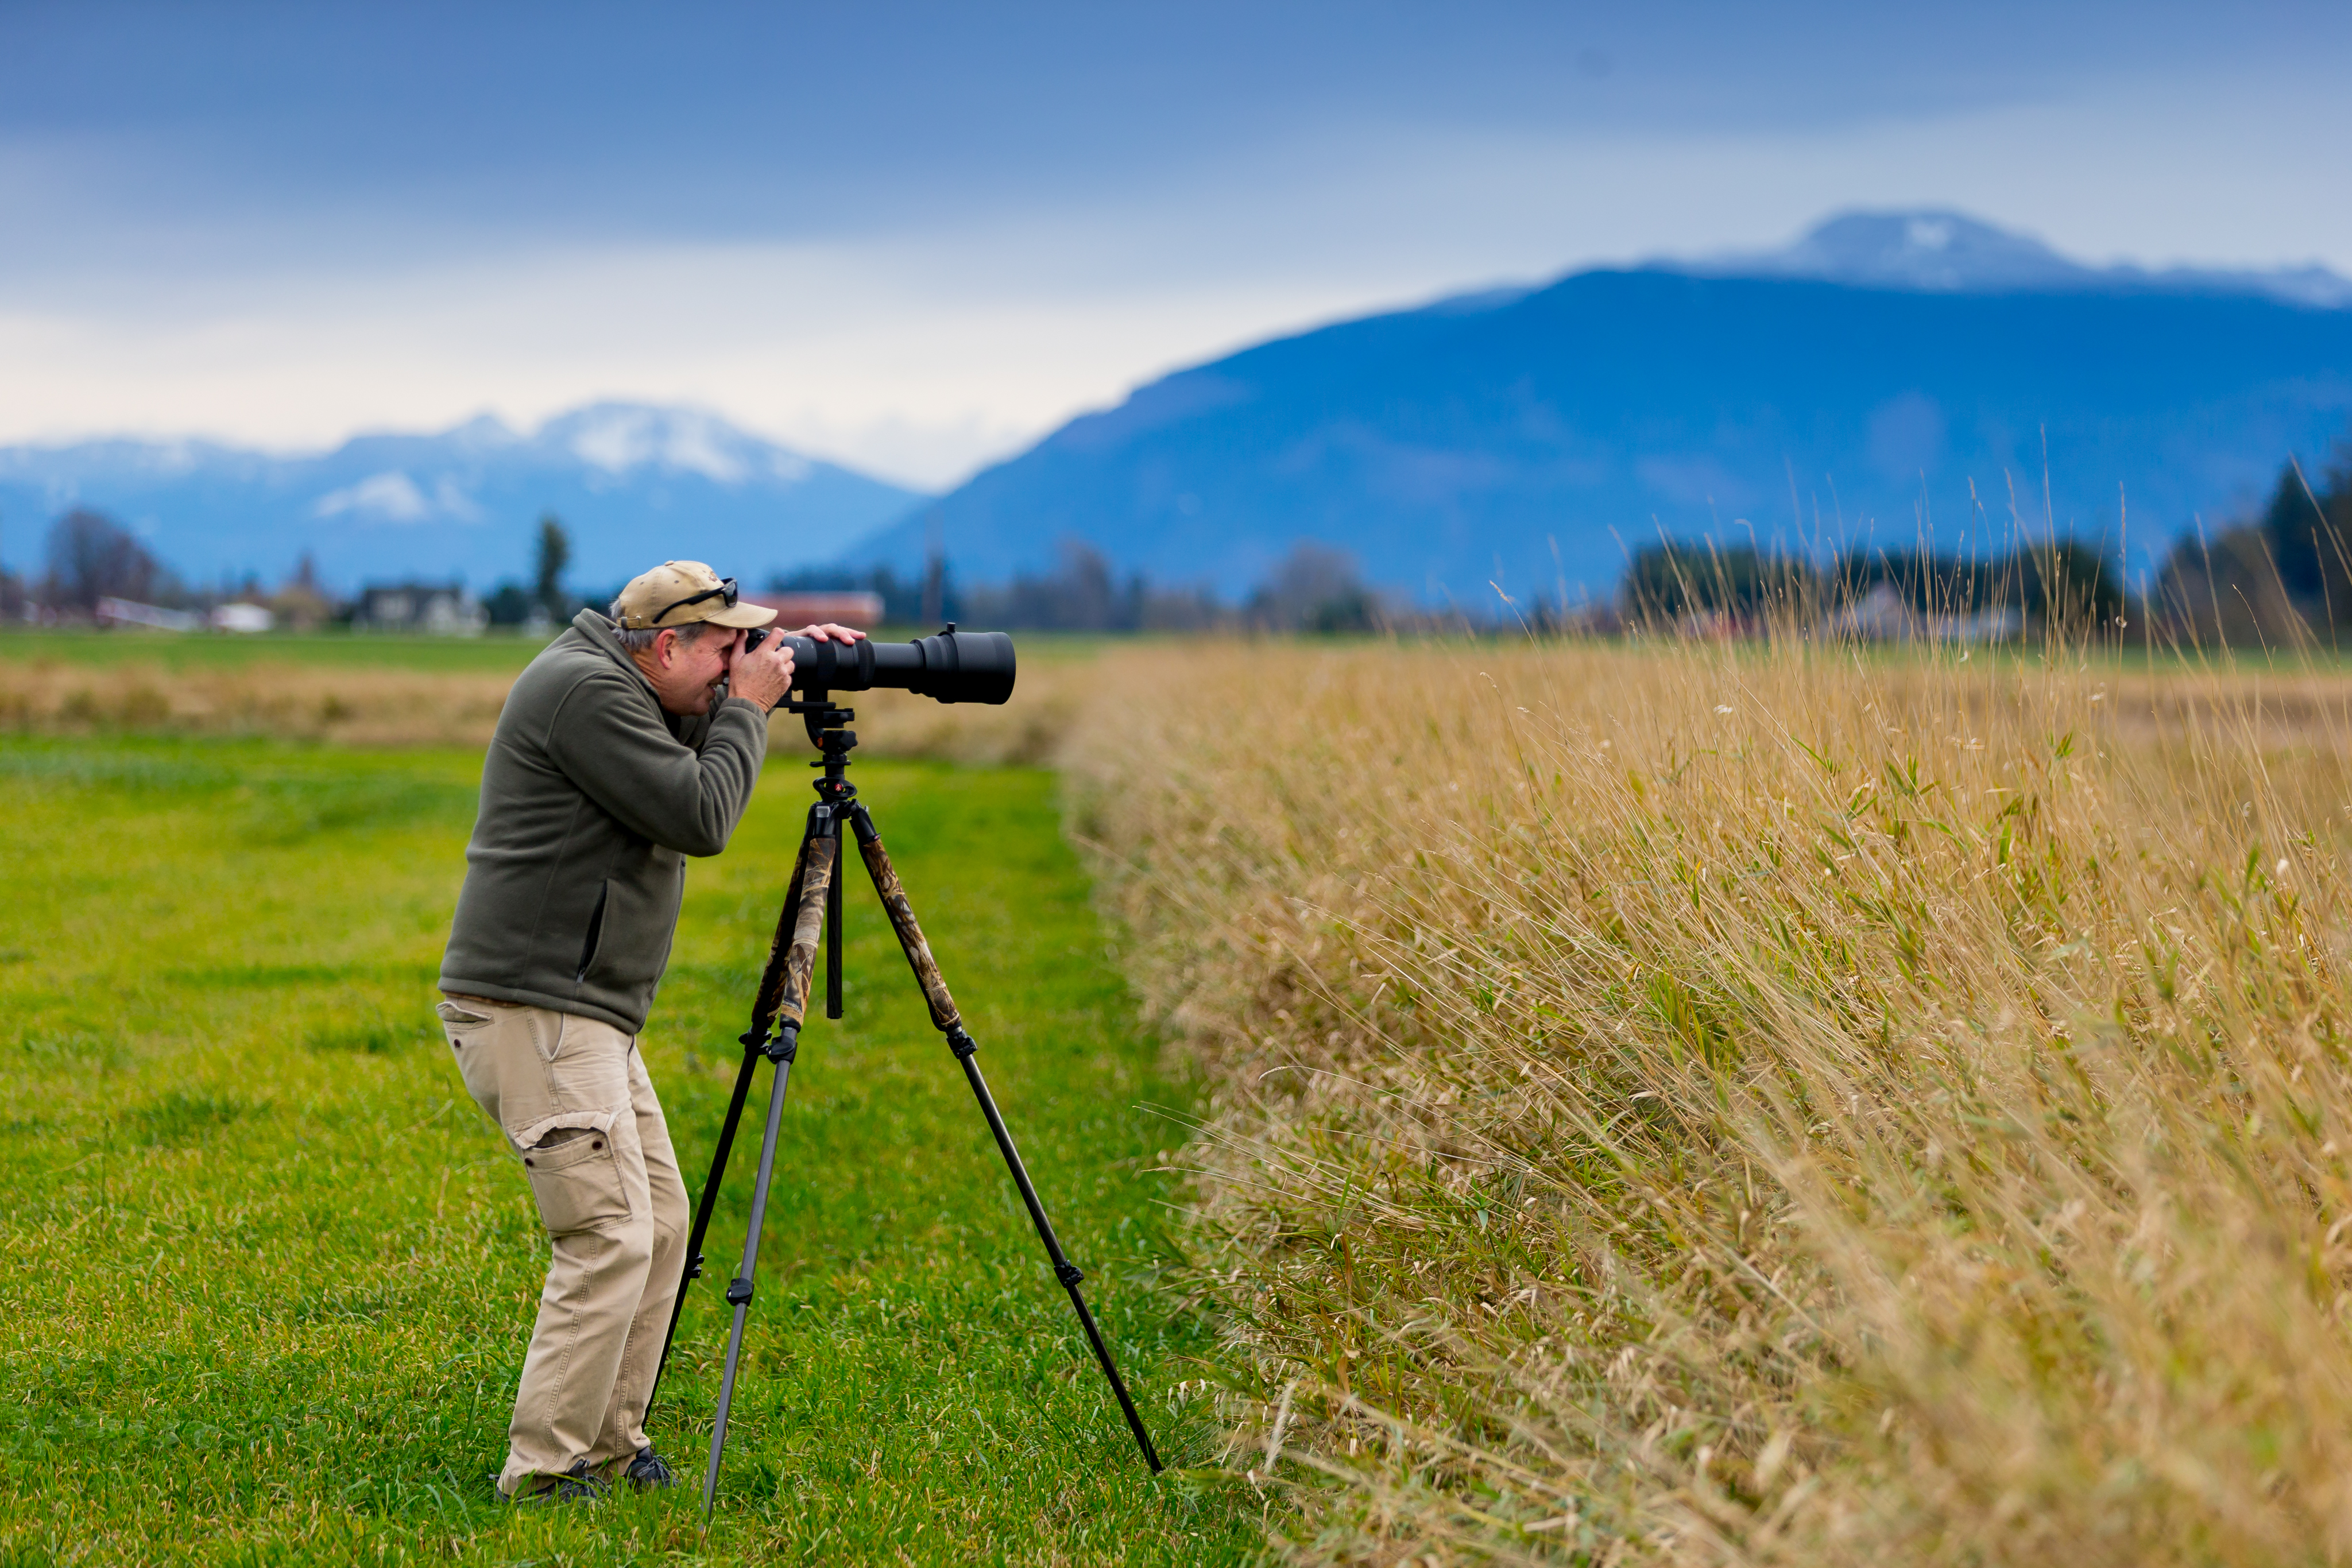 Chuck Mell, whose hobby is taking photos of nature and wildlife takes photos of snow geese and trumpeter swans in the Skagit Valley. He uses uReporter app to upload his pictures to the Skagit Valley Herald. (Photography by Scott Eklund/Red Box Pictures)